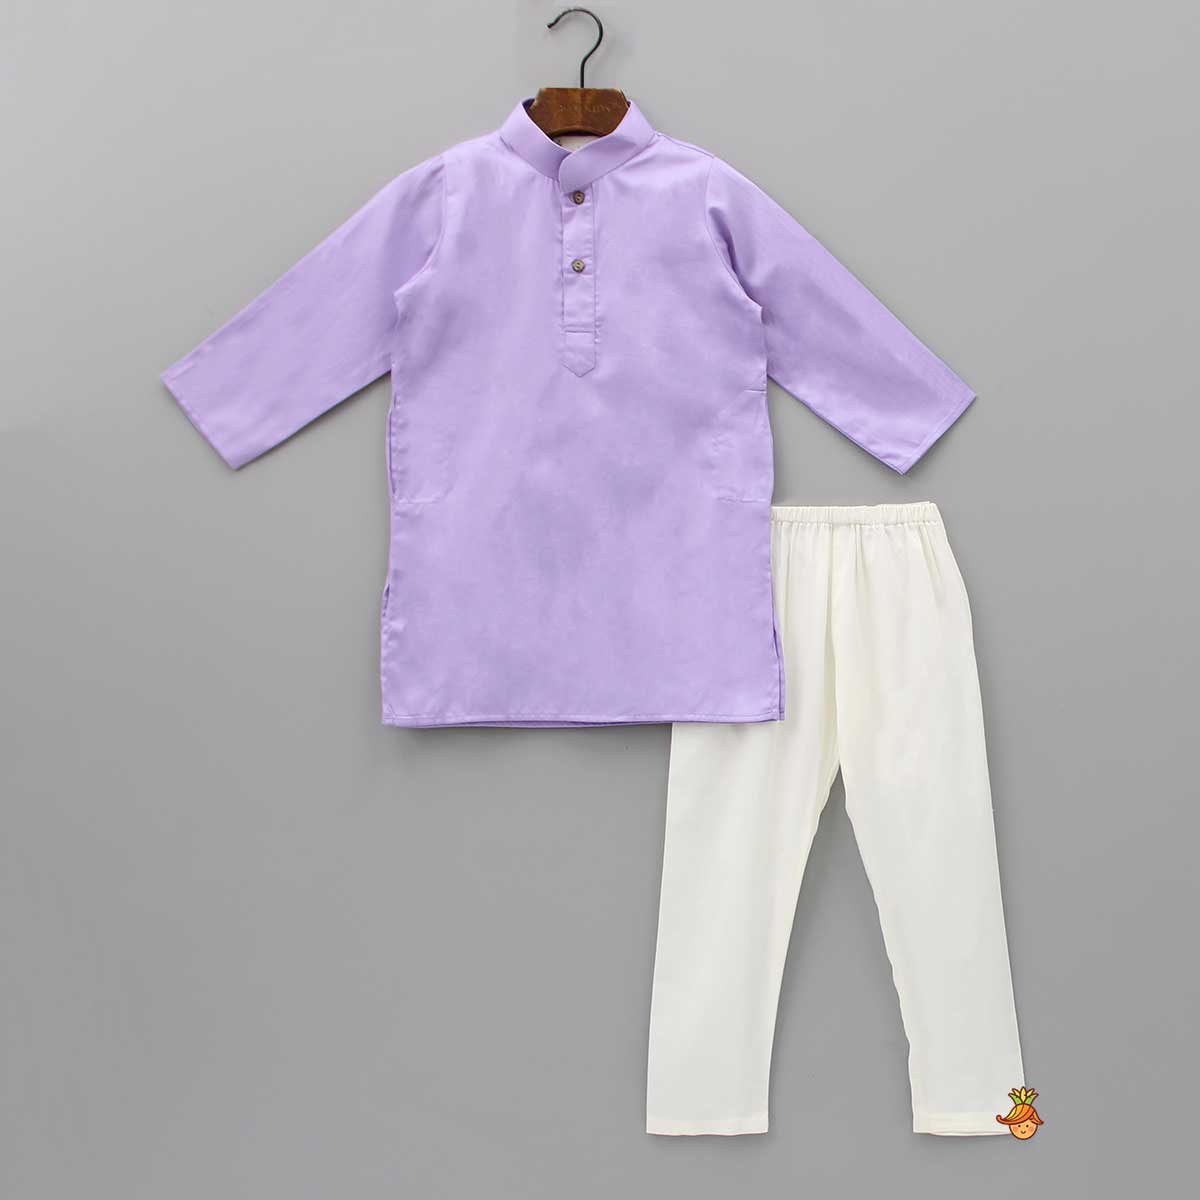 Lovely Lilac Kurta With Floral Embroidered Jacket And Pyjama